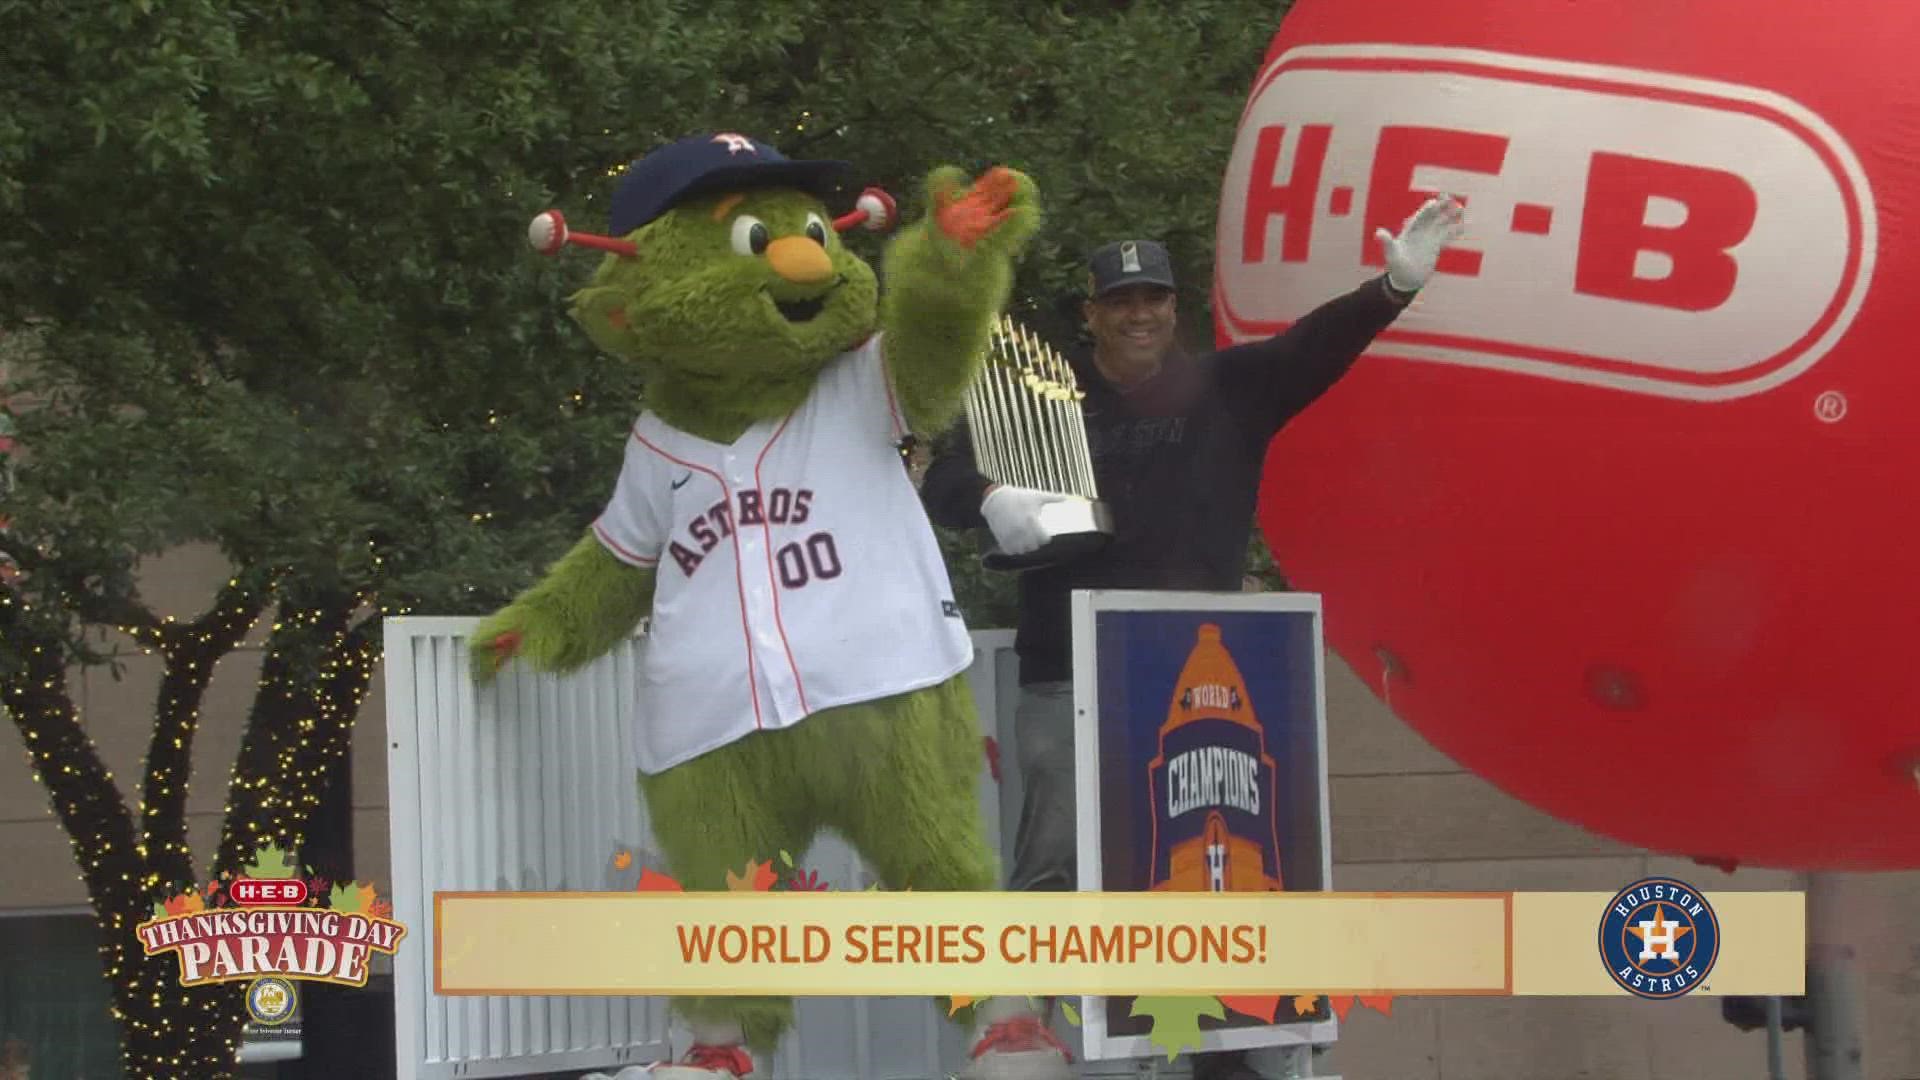 Several high school and college marching bands entertained the H-E-B Thanksgiving Day Parade crowd. Astros mascot Orbit was also there with the World Series Trophy.